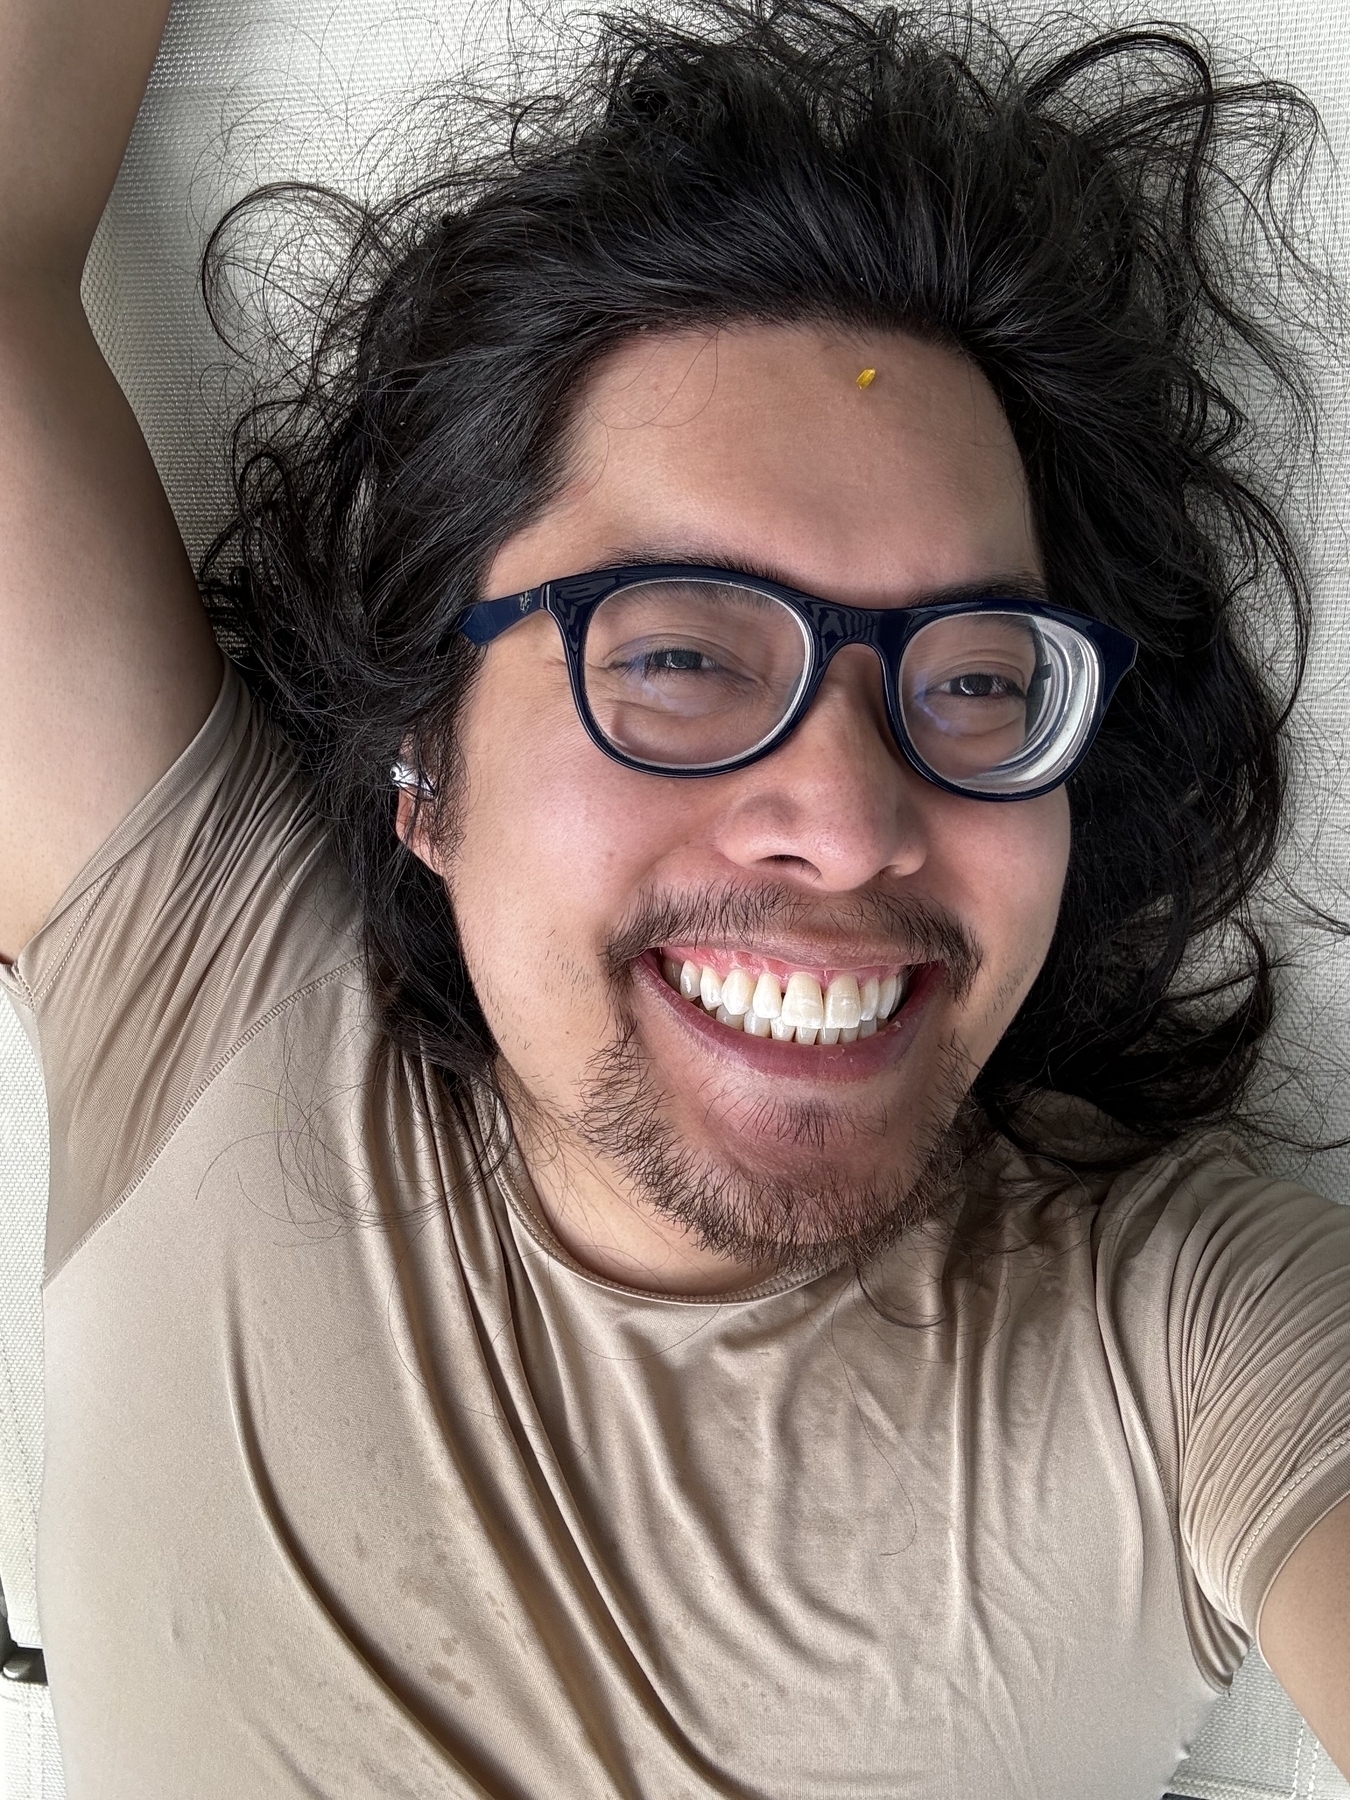 Miguel a masc Filipino man with black hair is looking at the camera with glasses. Yes smiling